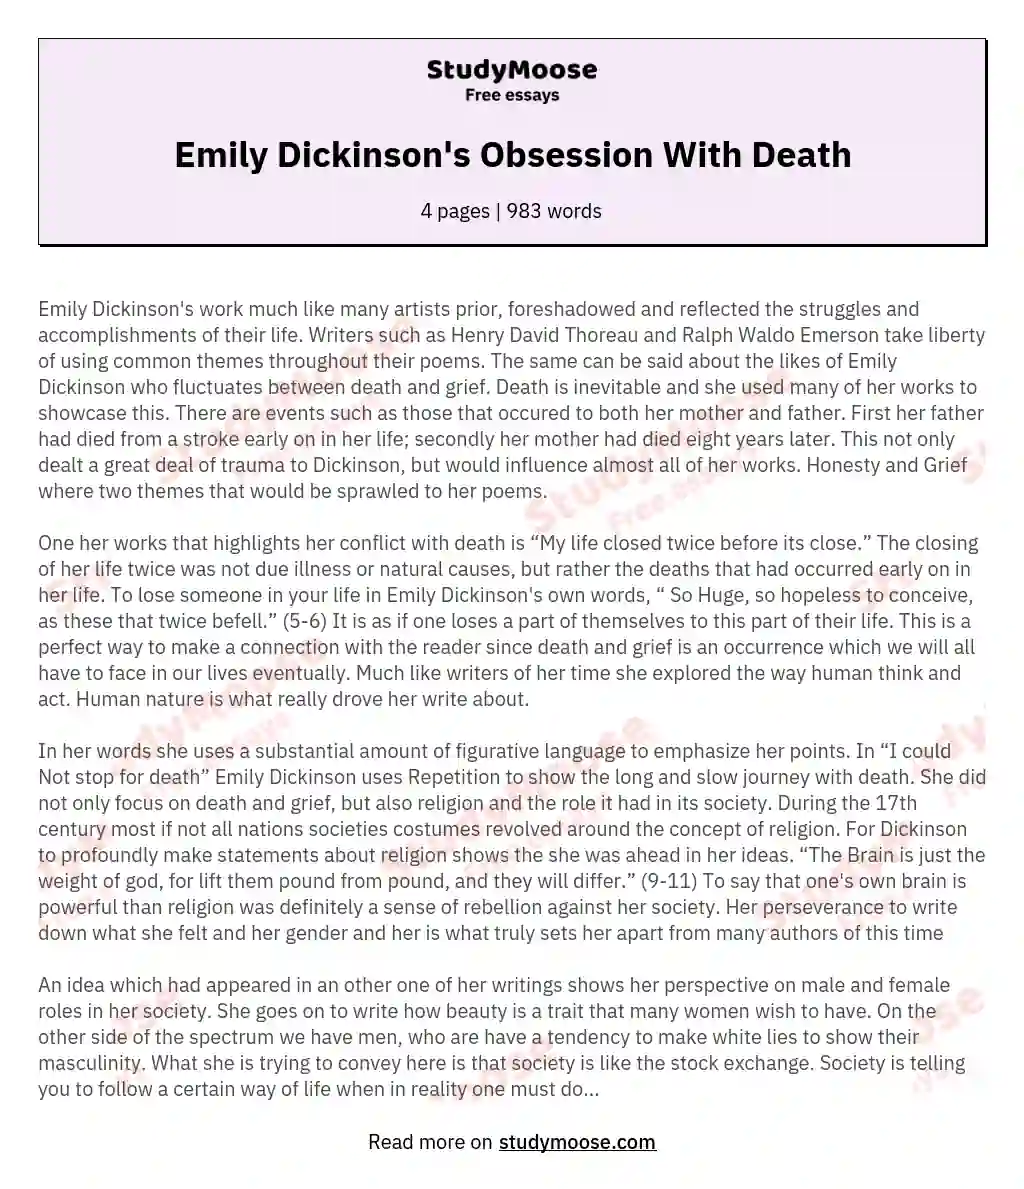 Emily Dickinson's Obsession With Death essay